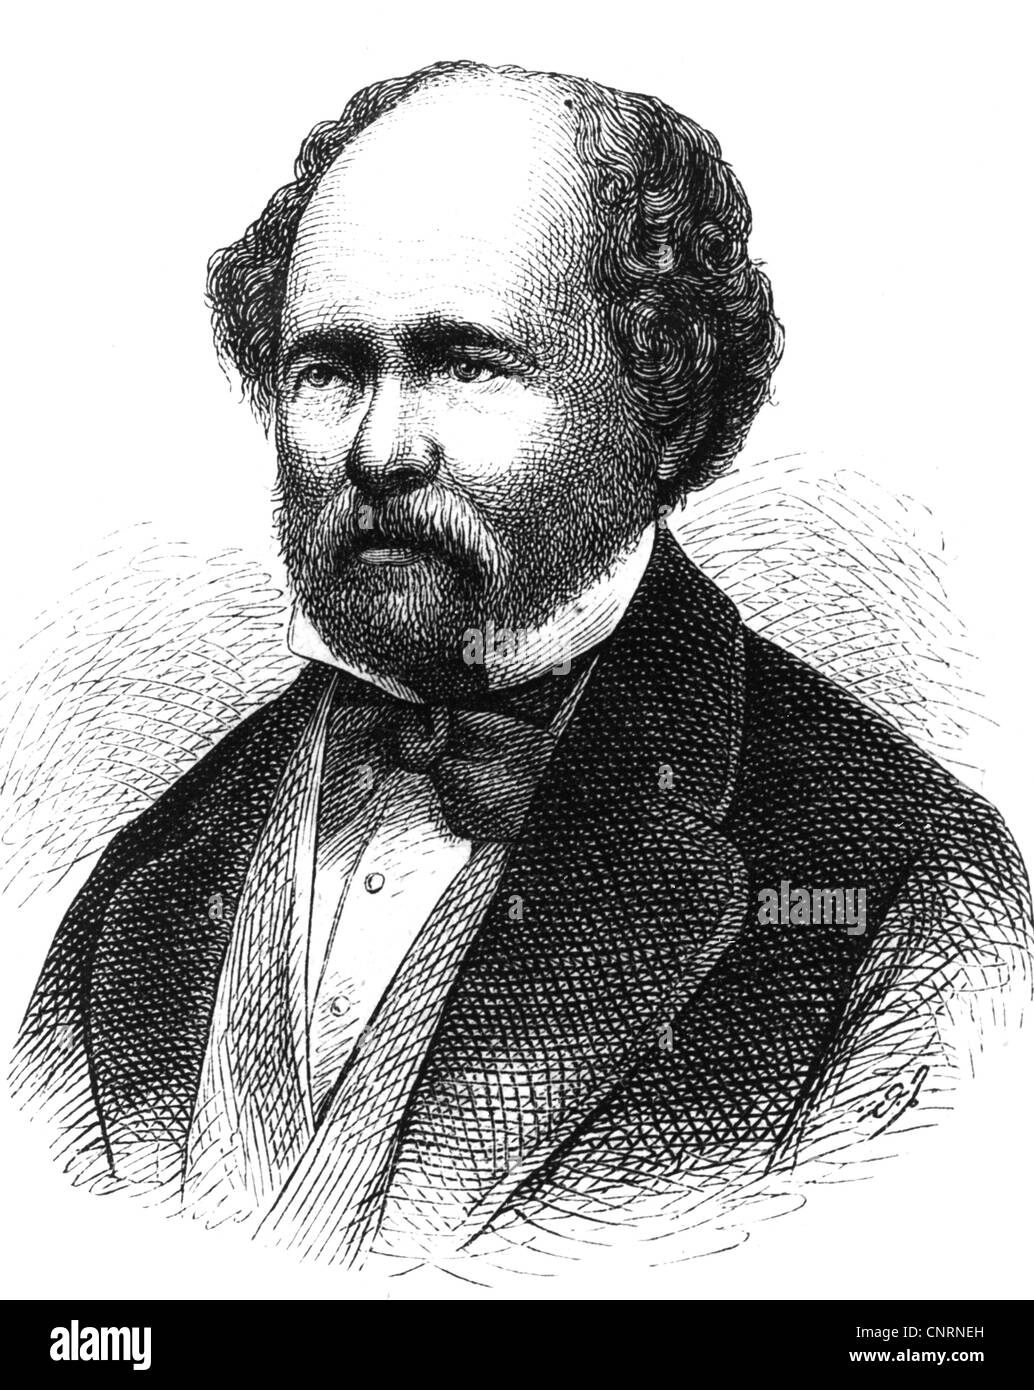 Maury, Matthew Fontaine, 14.1.1806 - 1.2.1873, US American naval officer, oceanographer, 'father of modern oceanography', portrait, contemporary wood engraving, Stock Photo